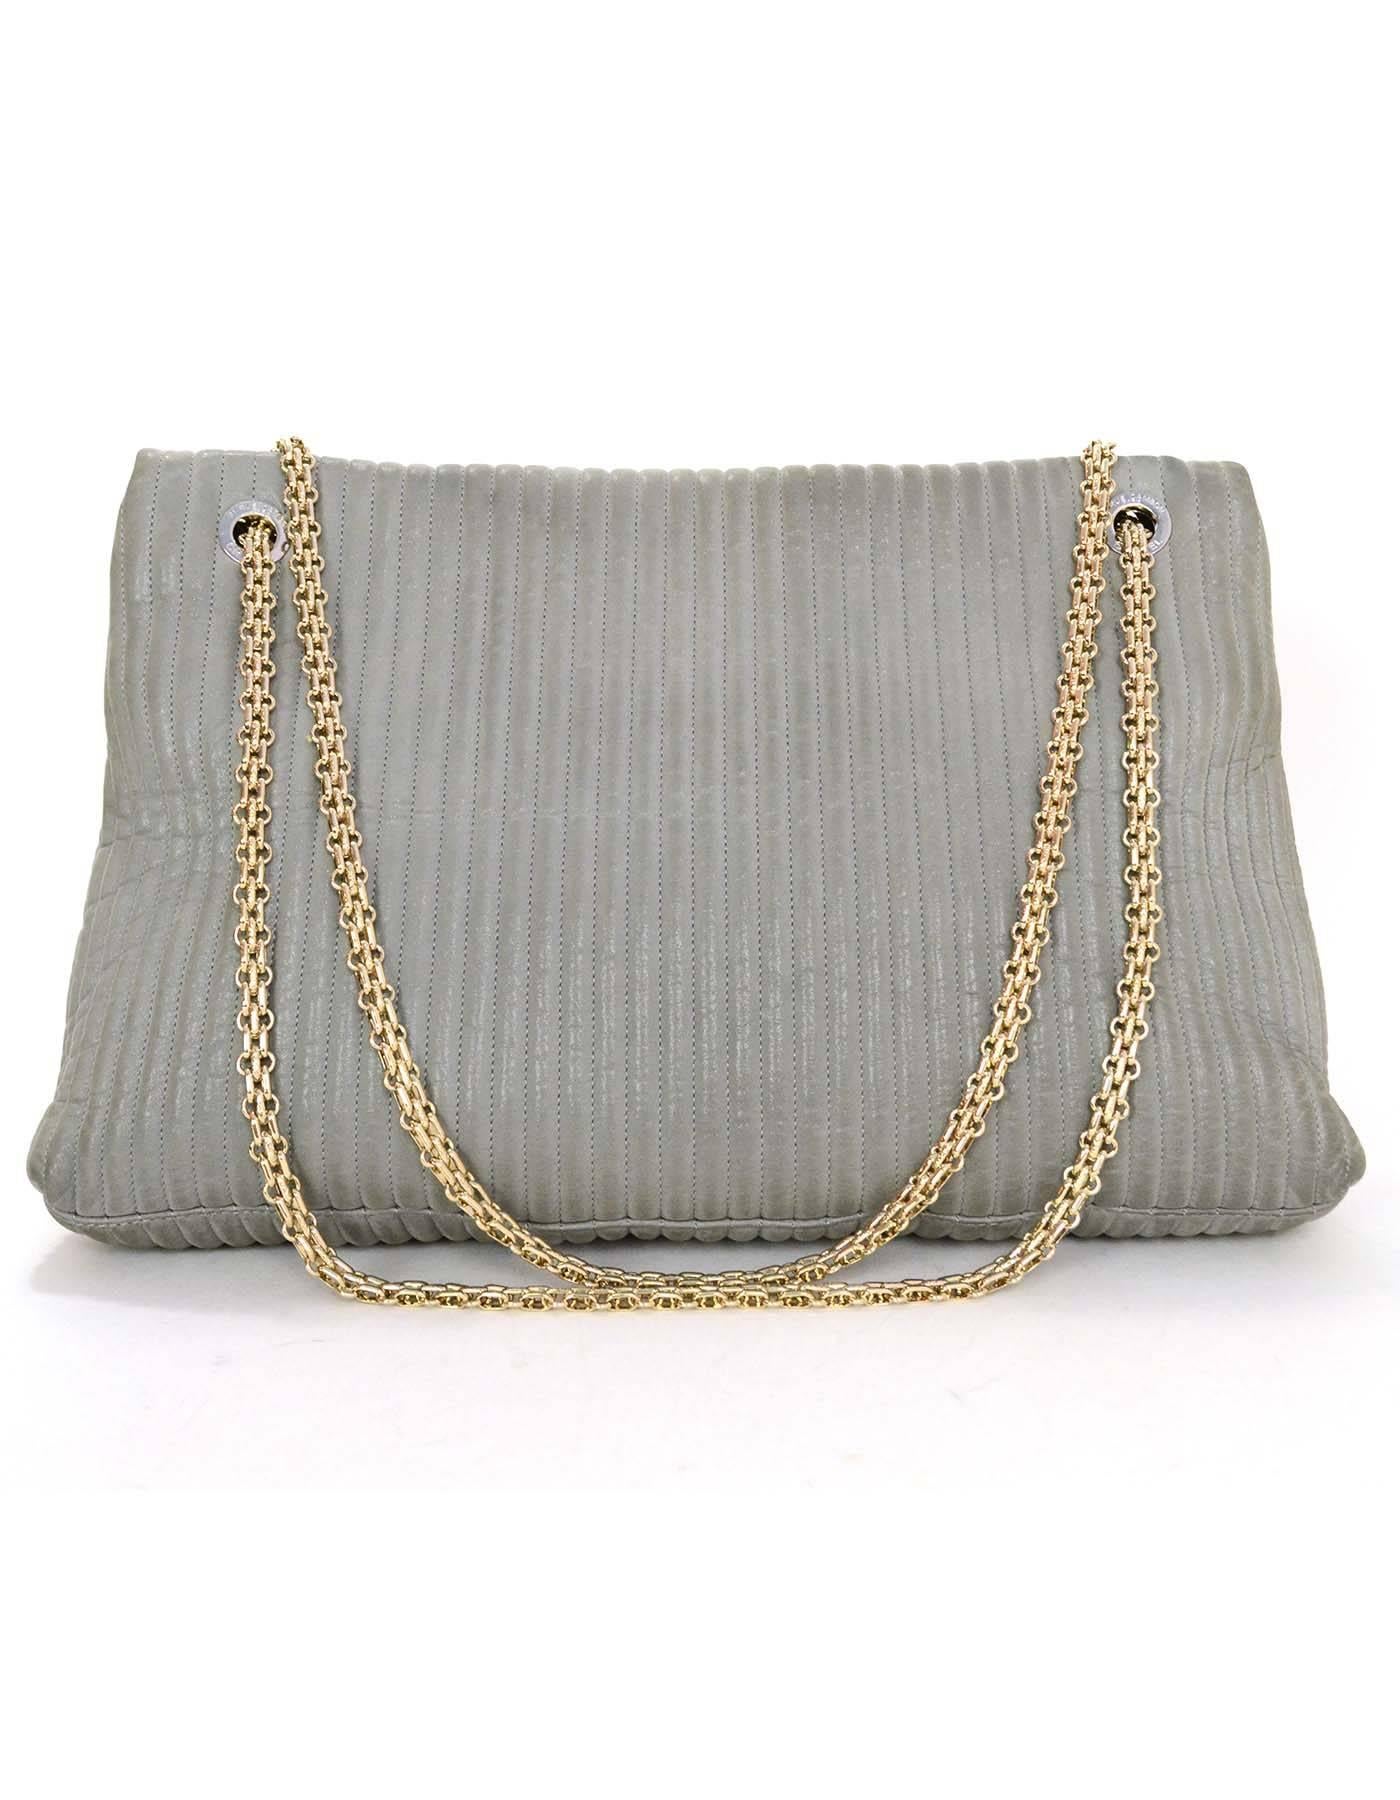 Chanel Reissue Grey Iridescent Quilted Leather Flap Bag GHW In Excellent Condition In New York, NY